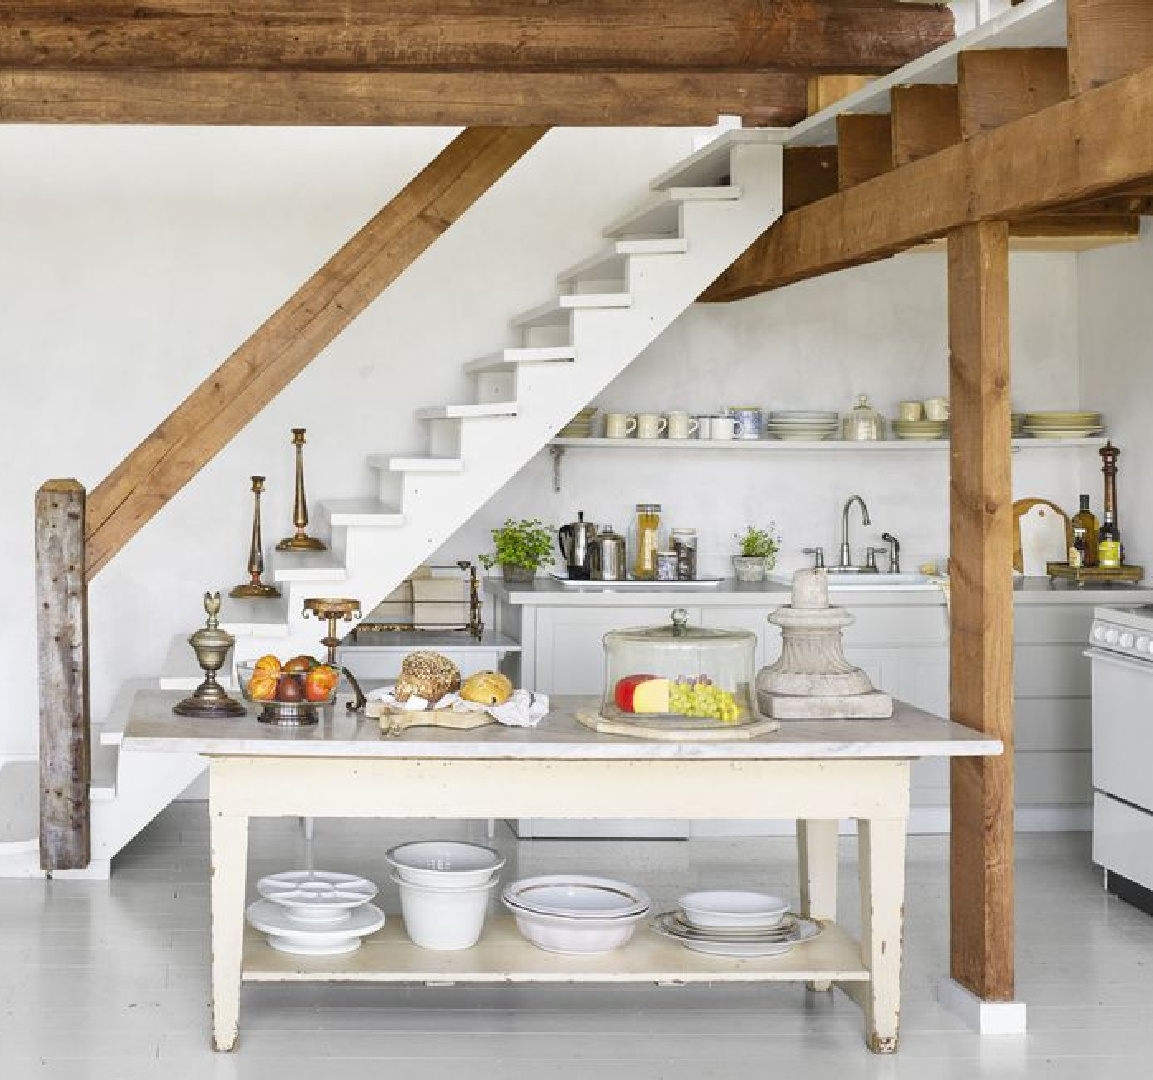 Scandinavian style inside a beautiful barn converted into a guest house in New York by Gun Nowak. Photo: Annie Schlechter. #countryhouse #newenglandstyle #nordiccharm